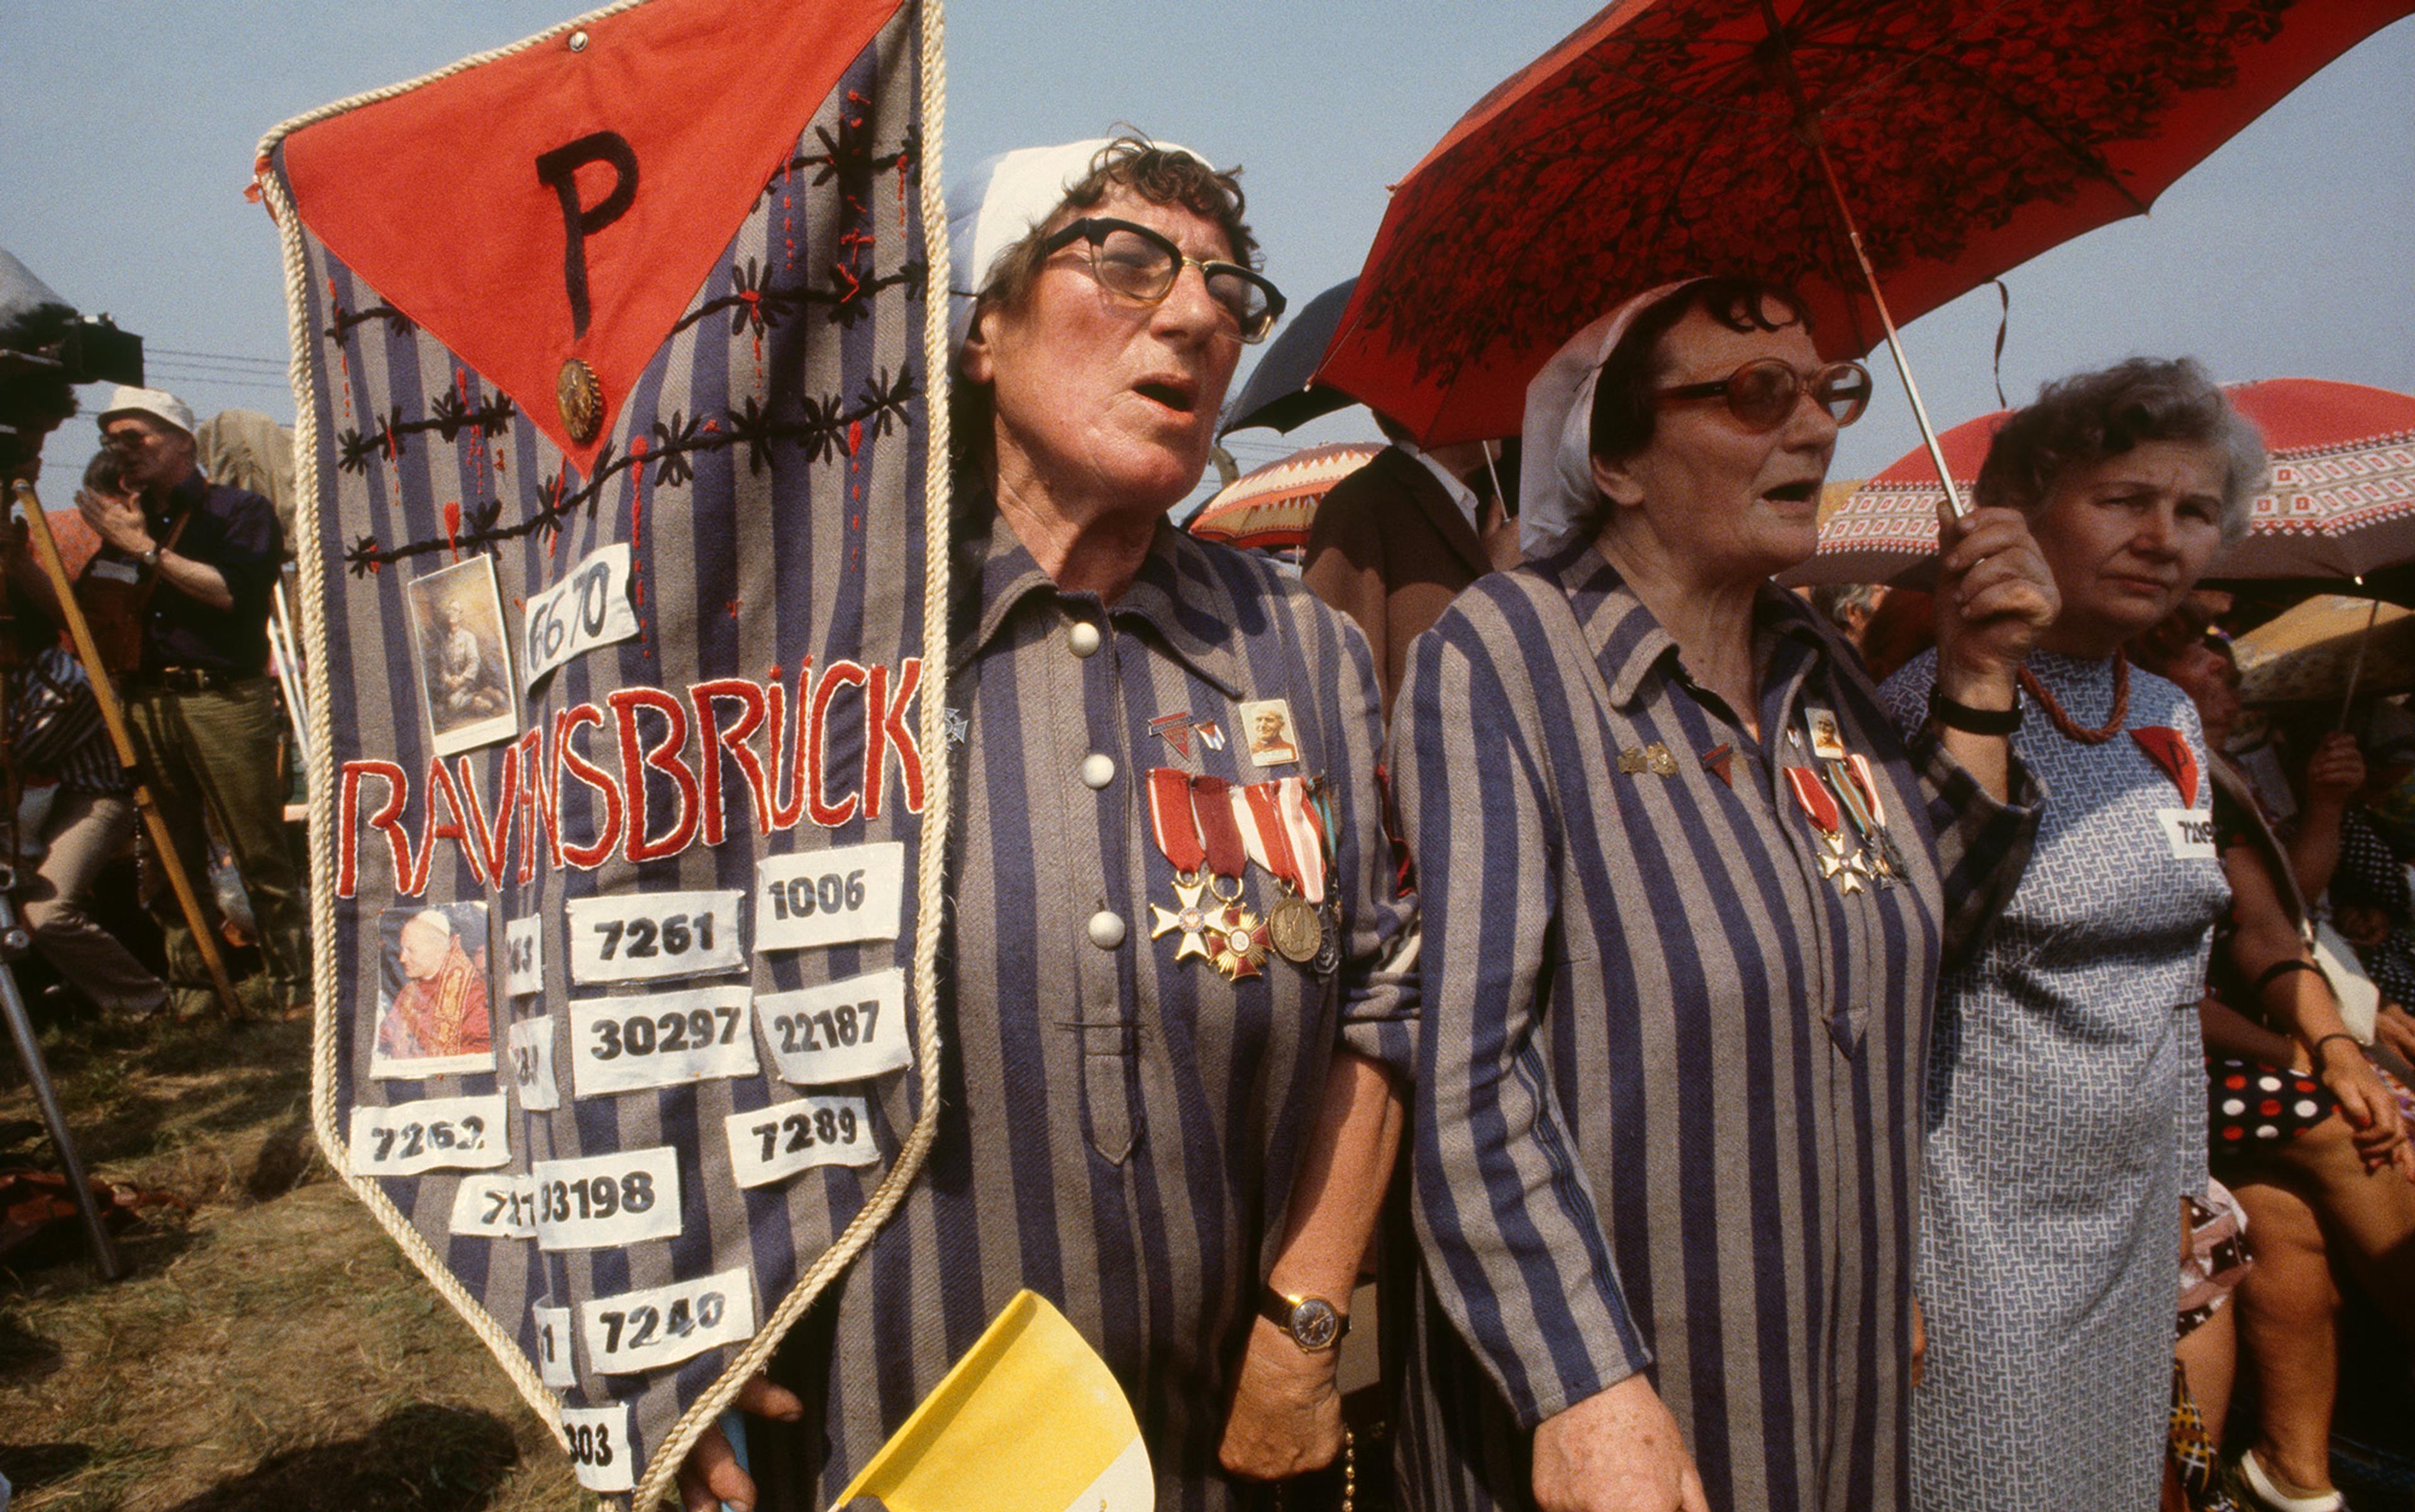 Women wearing striped uniforms and medals, holding a Ravensbrück banner and umbrellas, participating in a commemorative event outdoors.